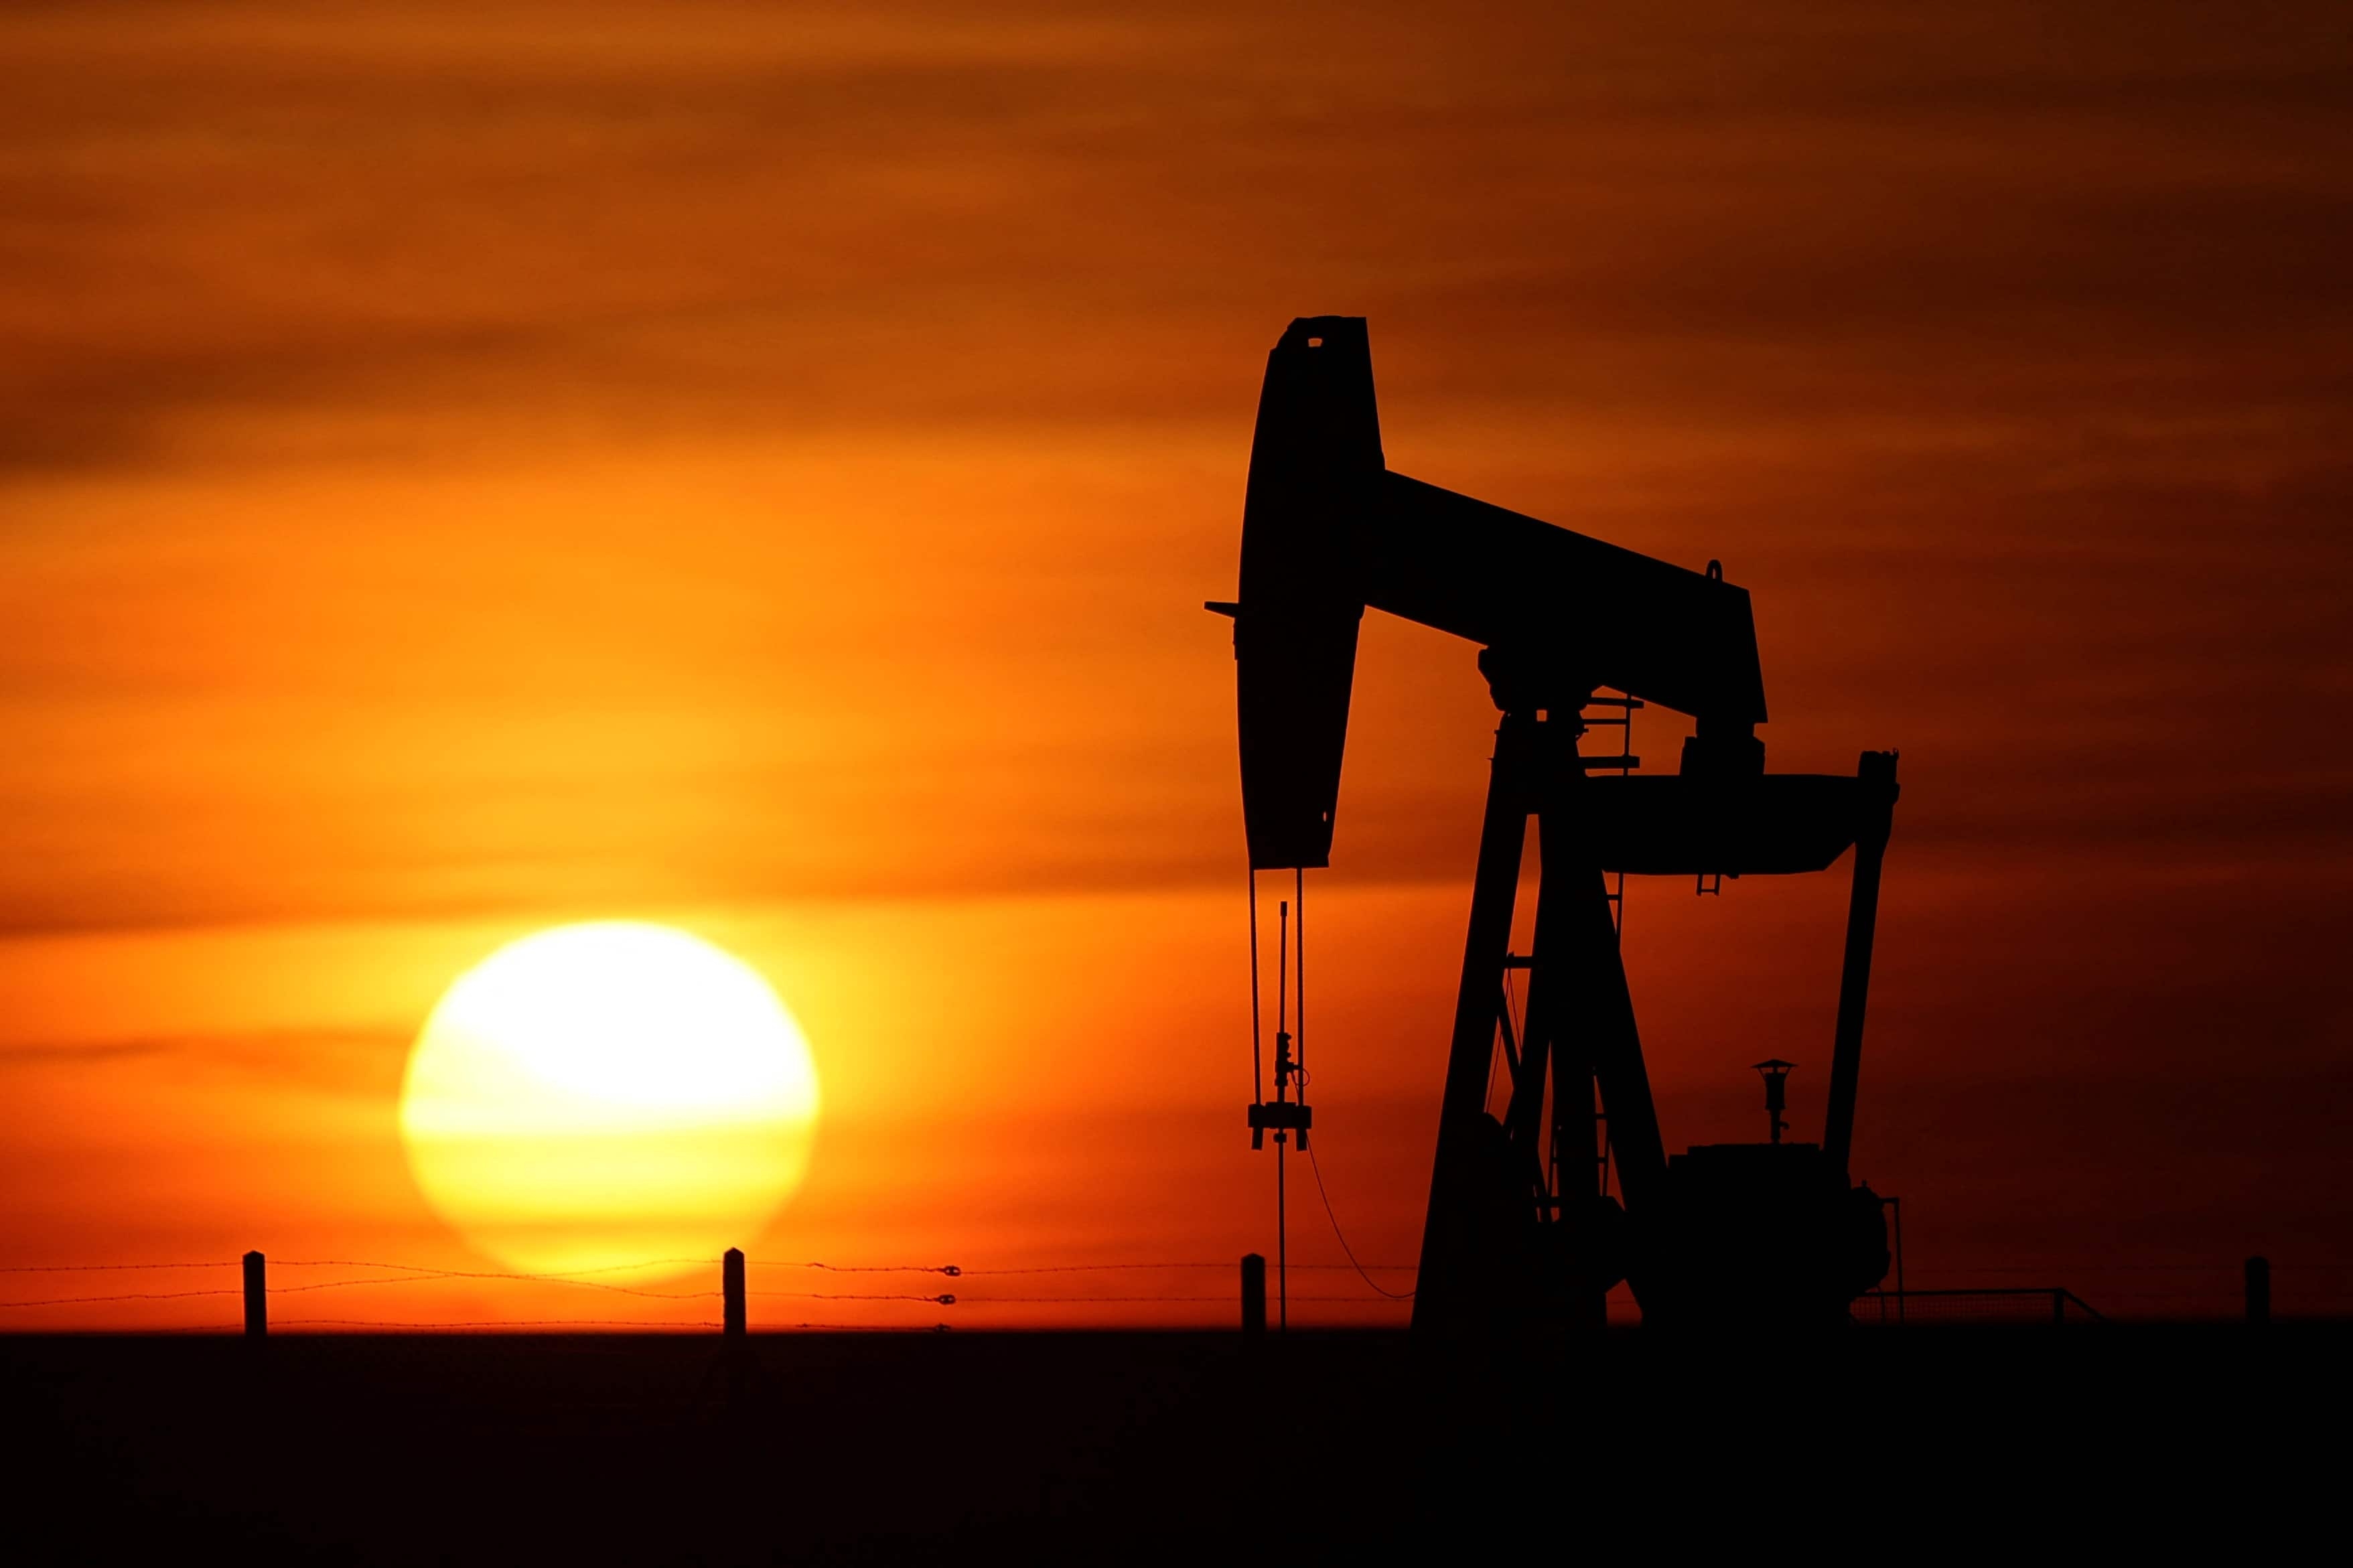 Oil prices tumbled more than 6% on Tuesday to their lowest in almost three weeks, as Russia suggested it would allow a revival of the Iran nuclear deal to go forward and as traders worried growing pandemic lockdowns in China could dent demand. Both Brent and US crude futures benchmarks settled below $100 per barrel for the first time since late February.